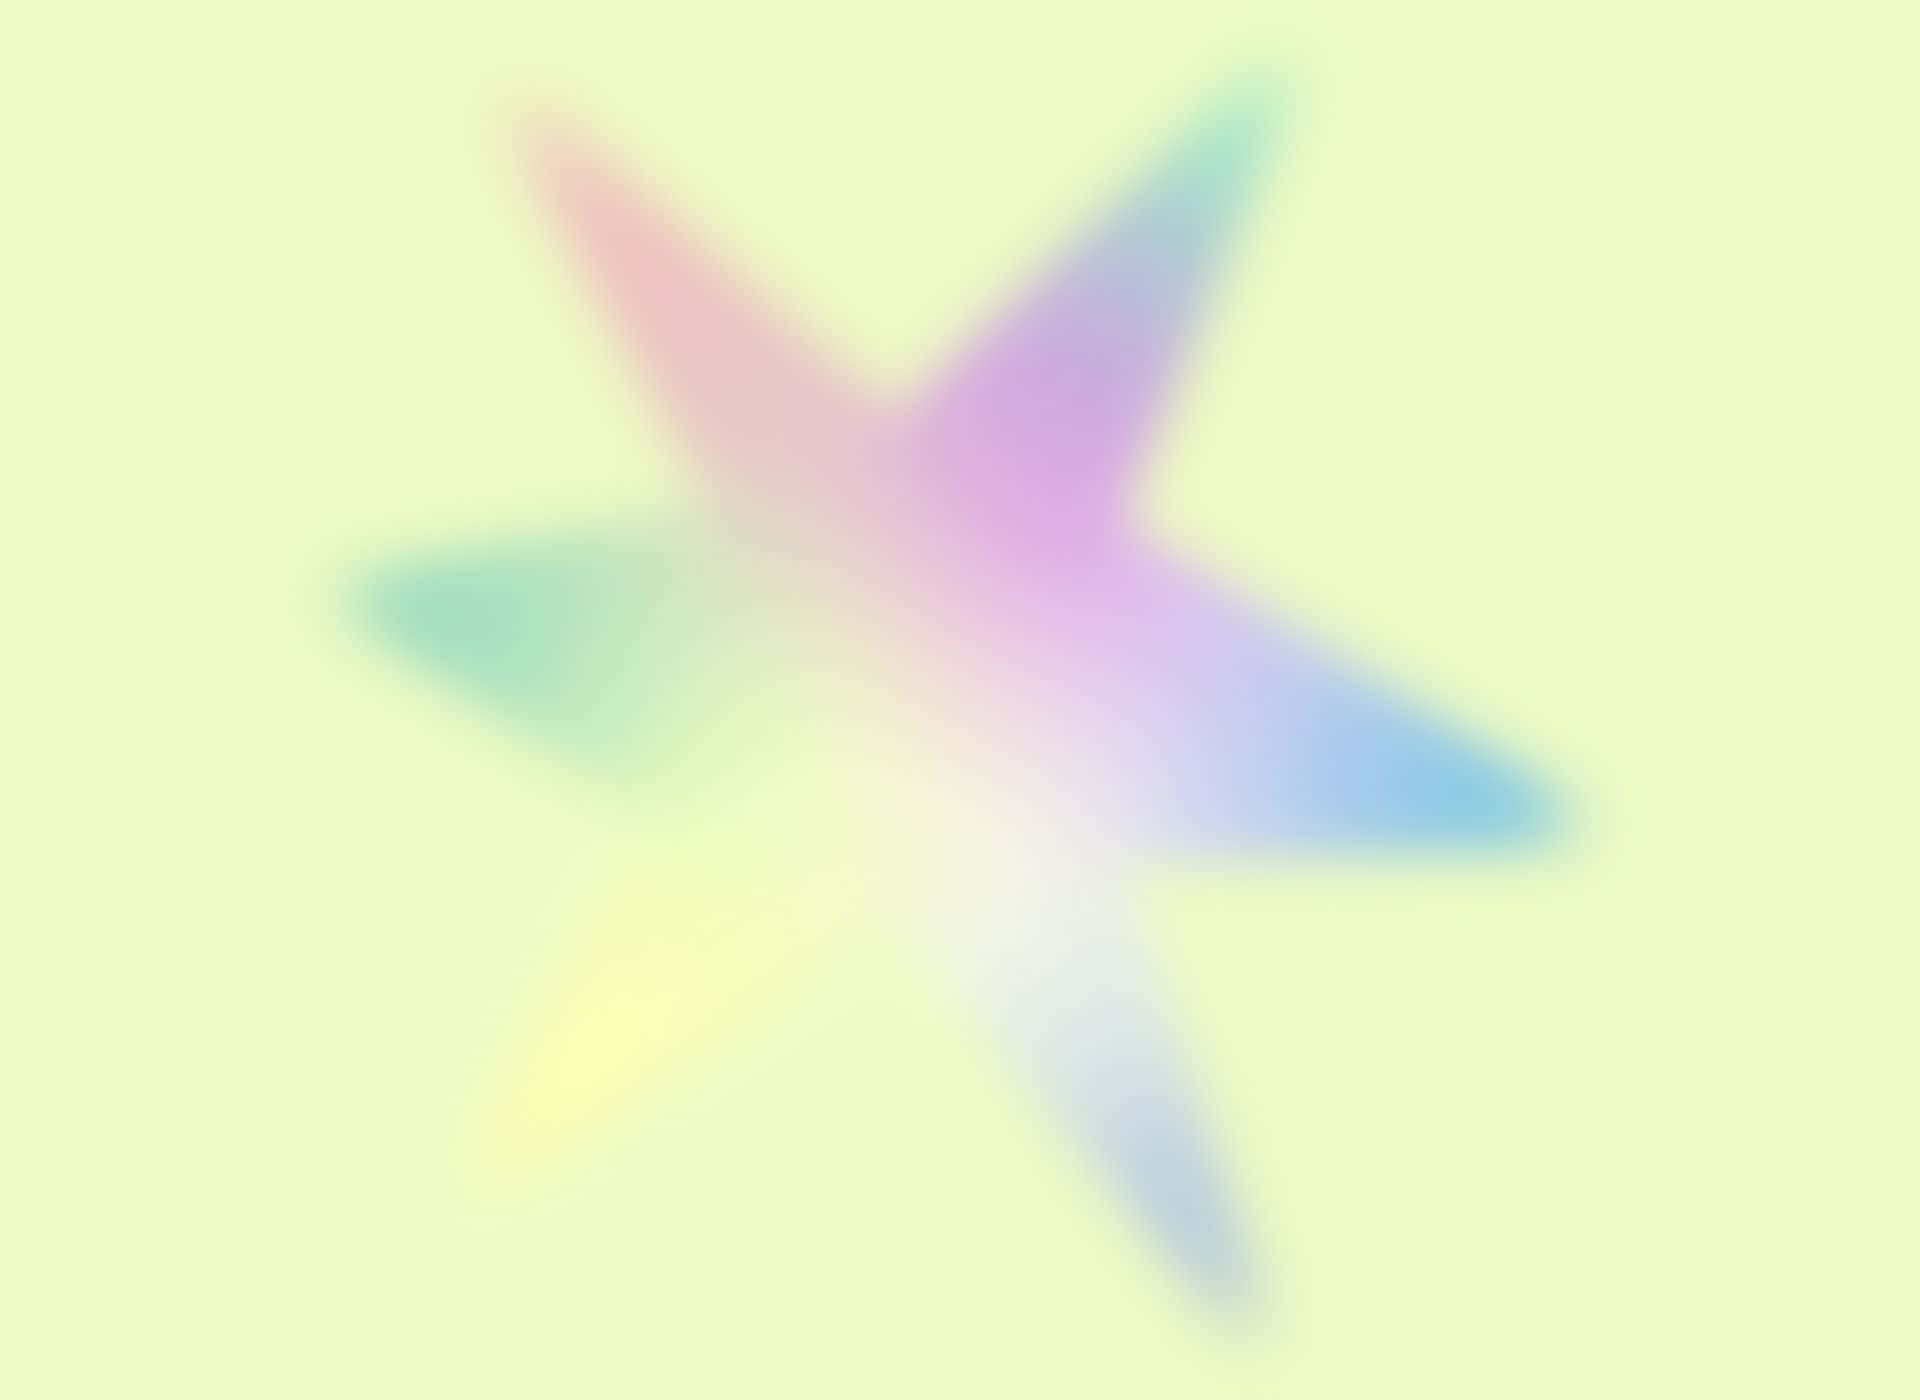 Digital Image Of Six-pointed Star Aura Background